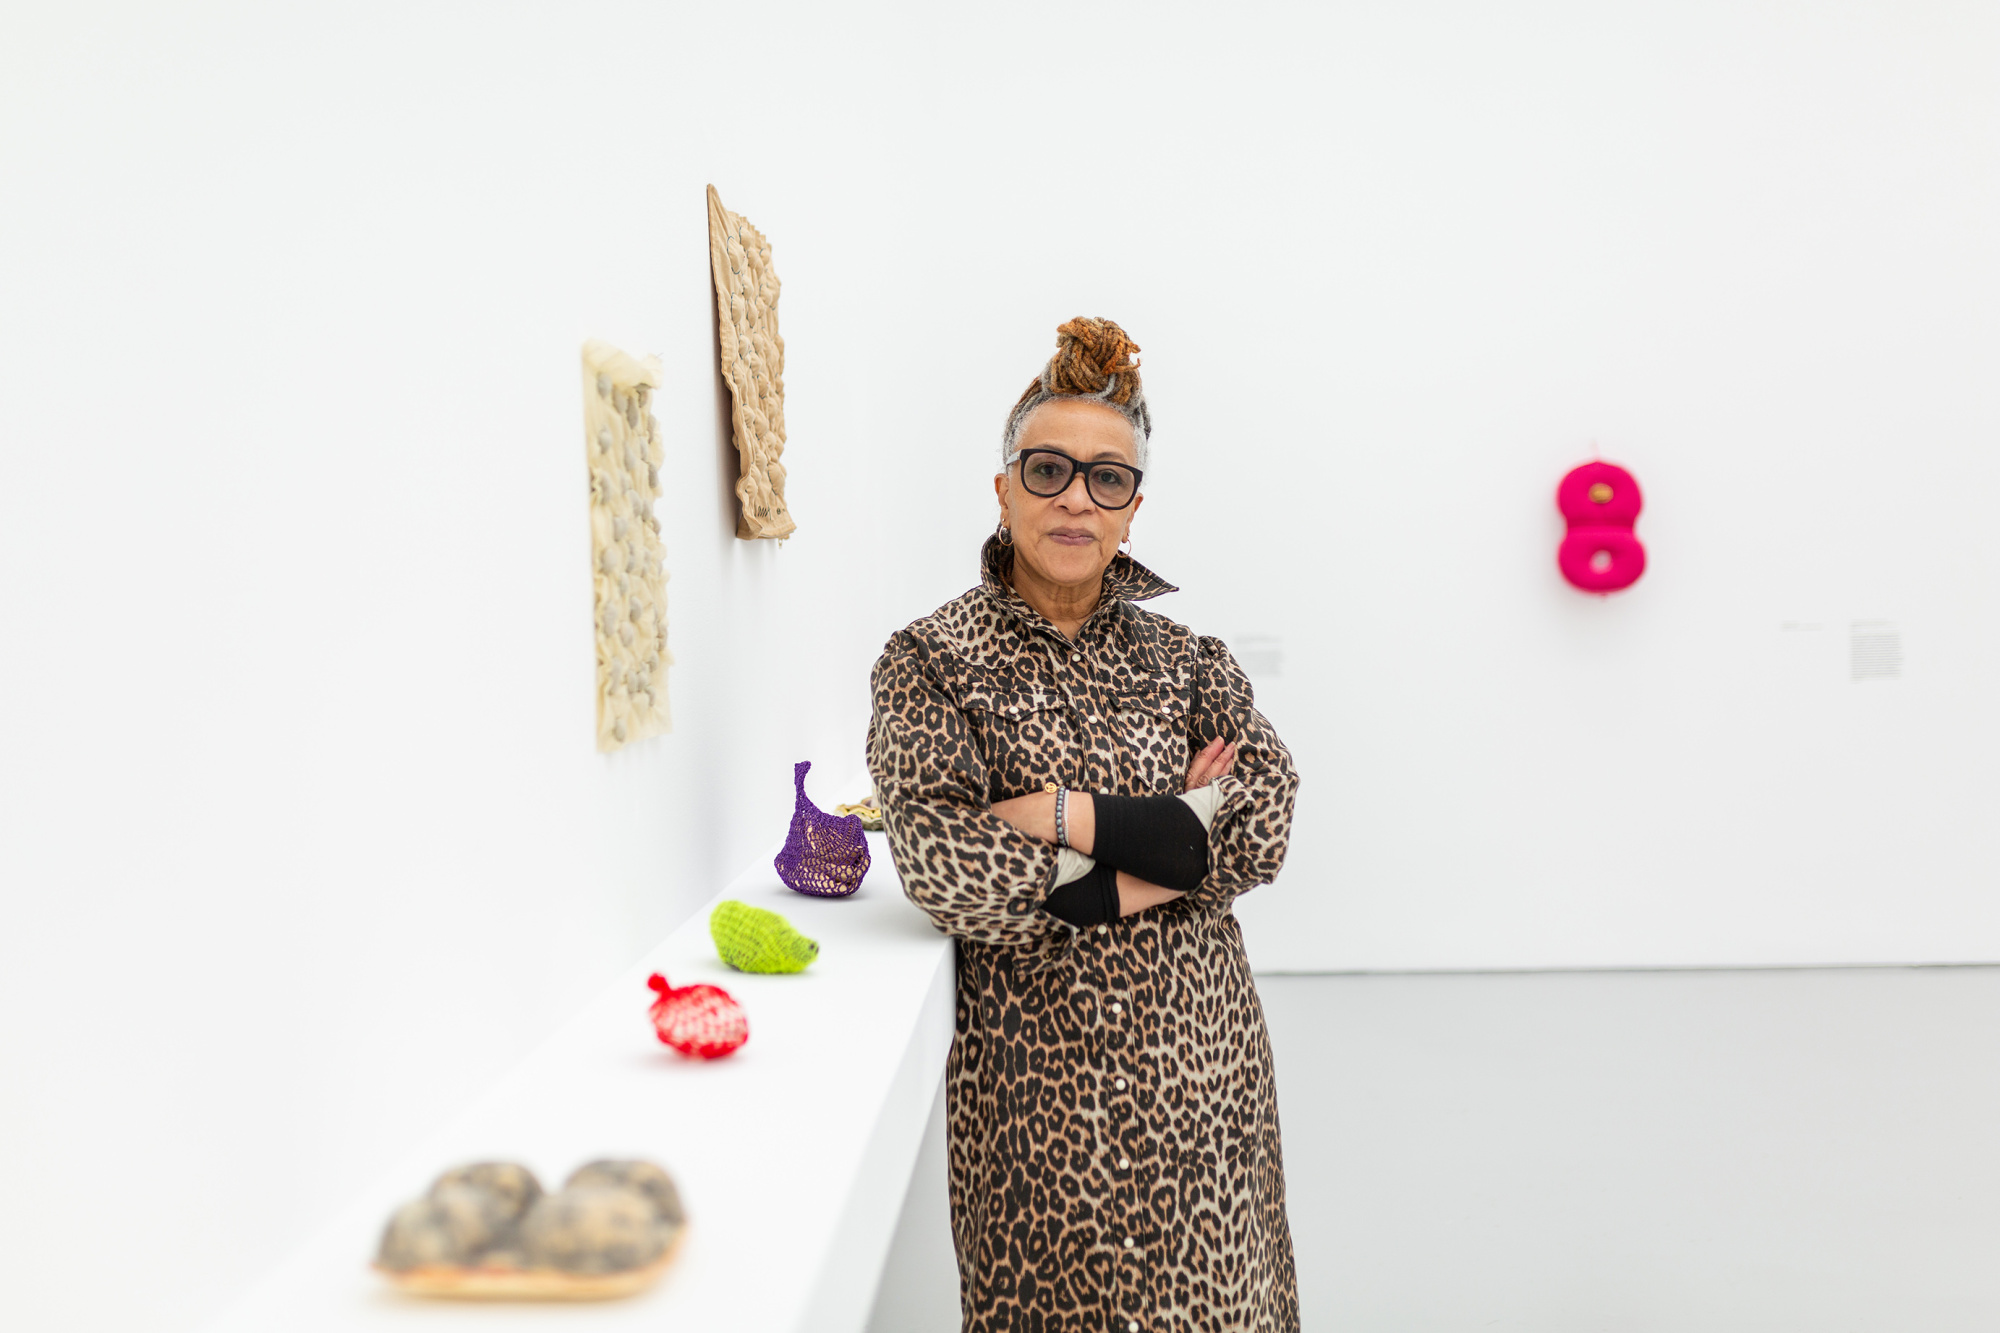 Veronica Ryan at Alison Jacques Gallery, 2022